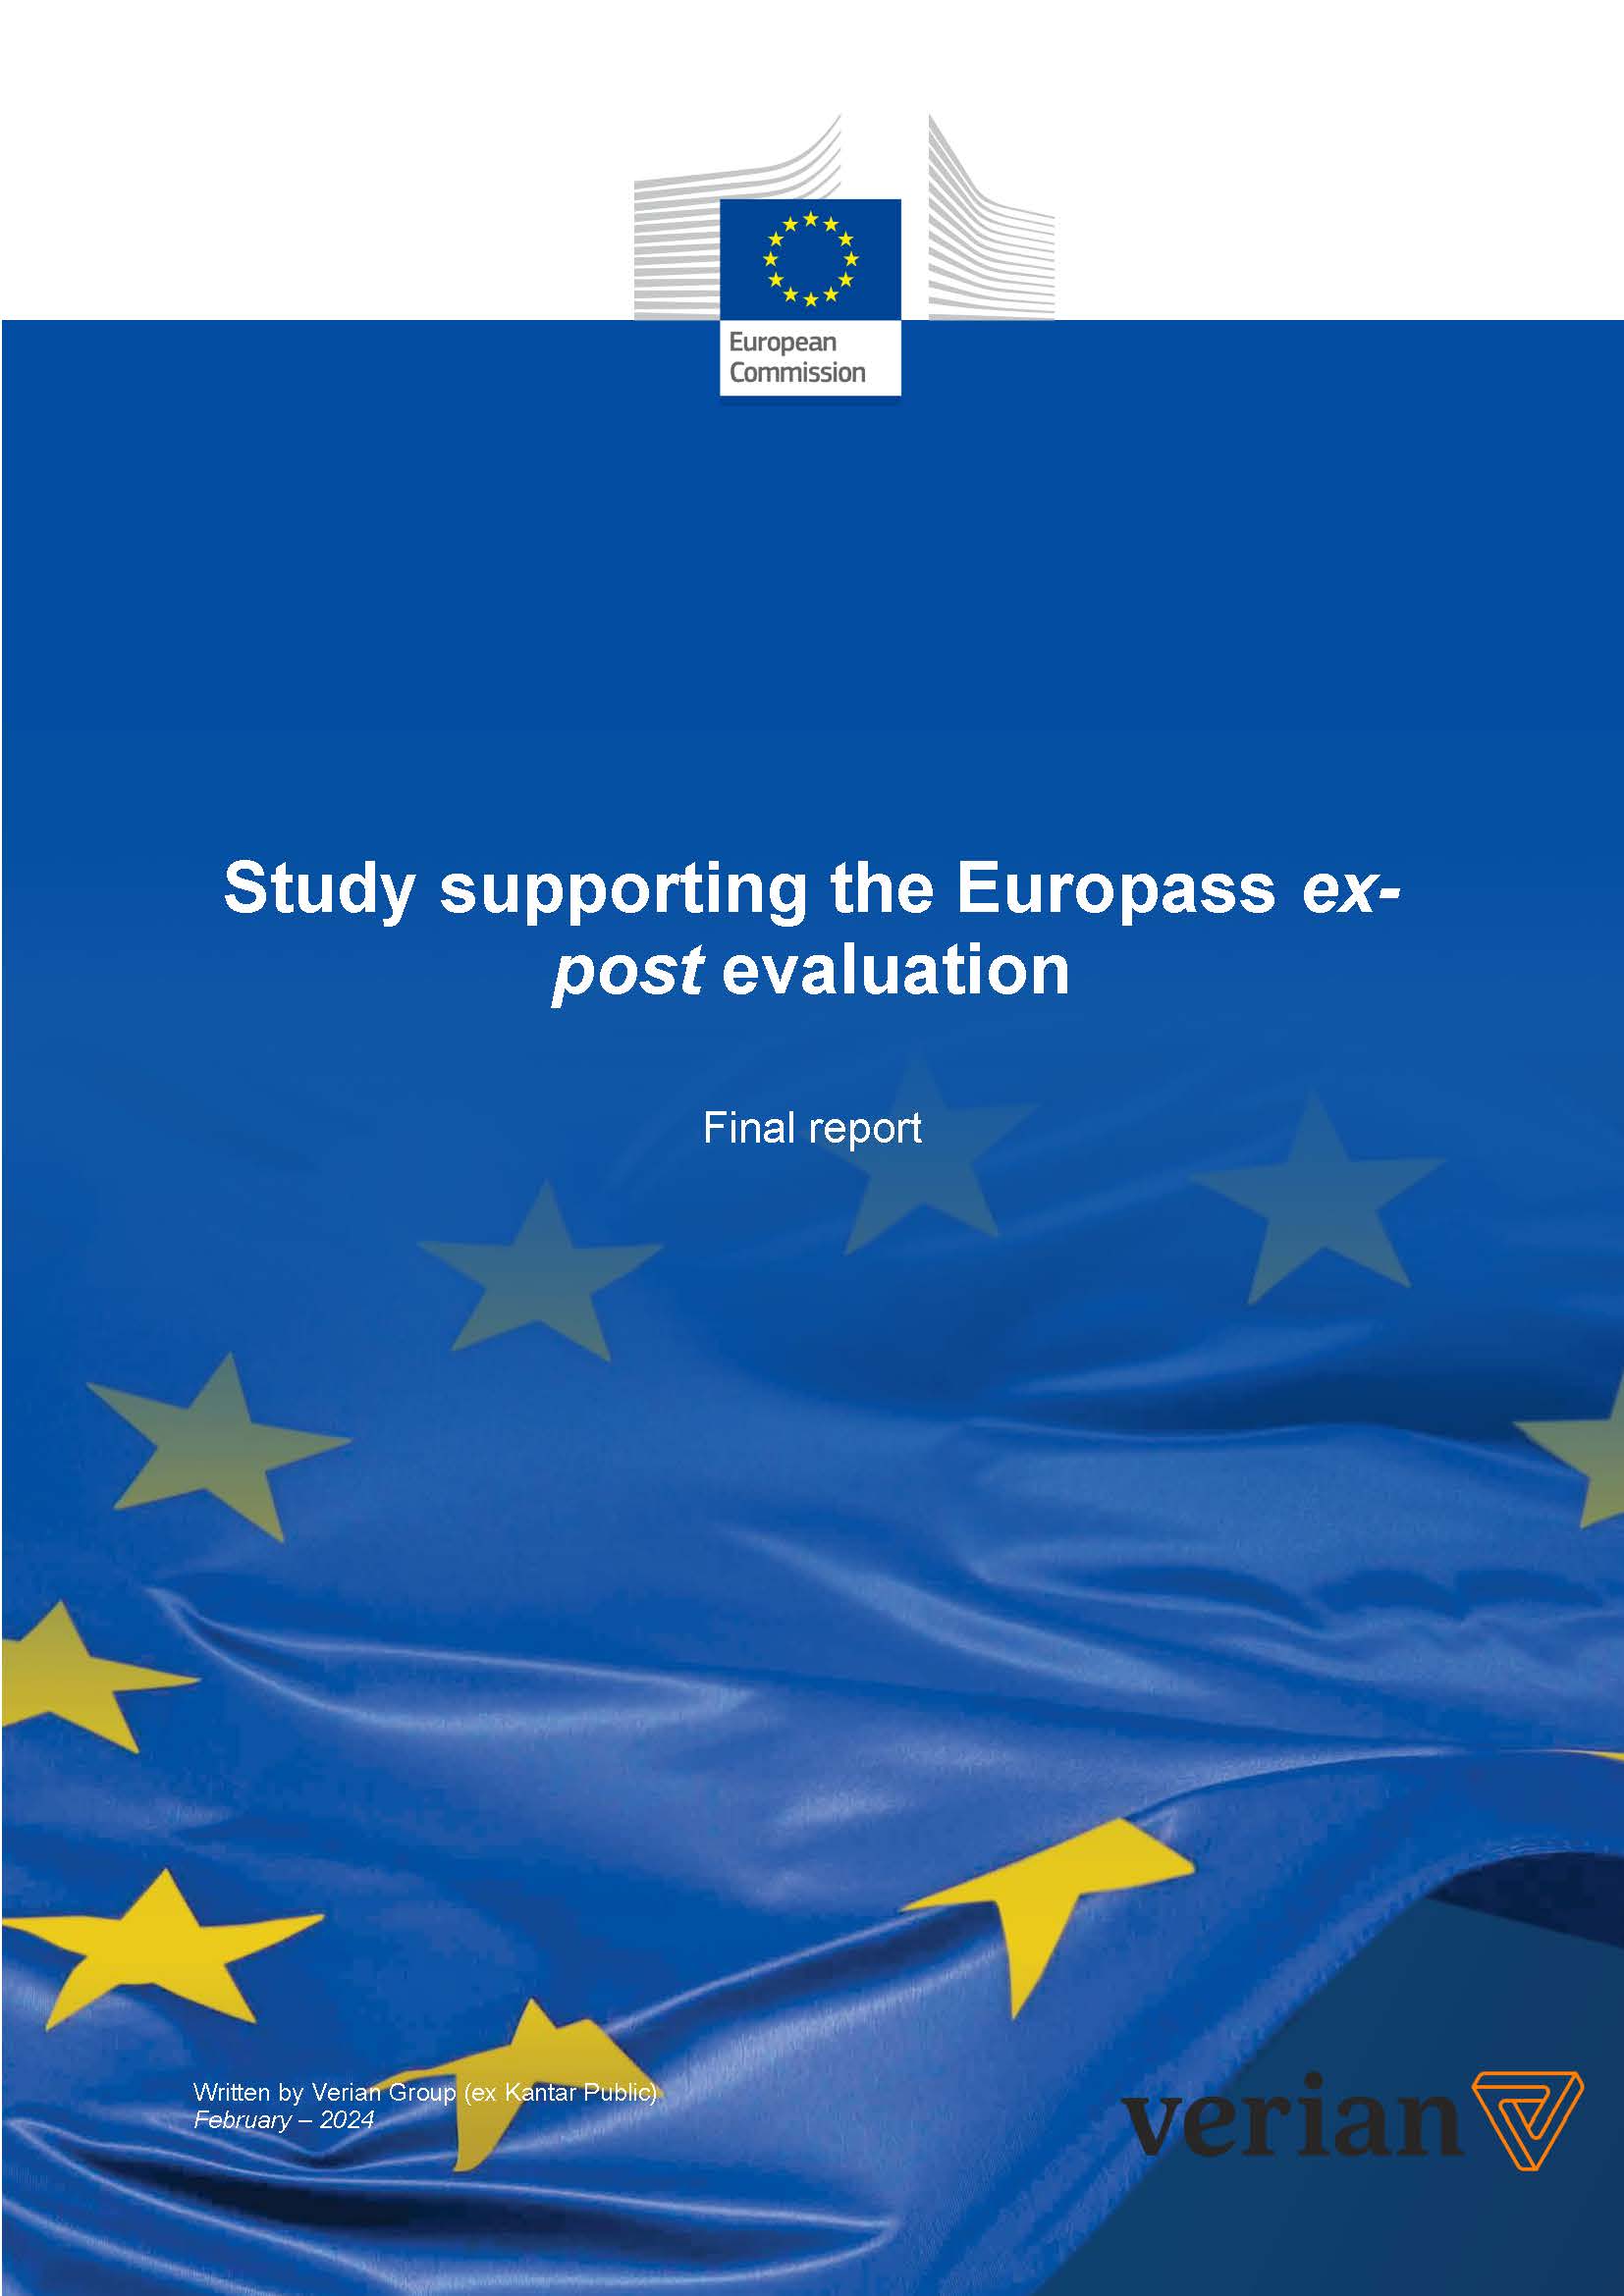 Study supporting the Europass ex-post evaluation